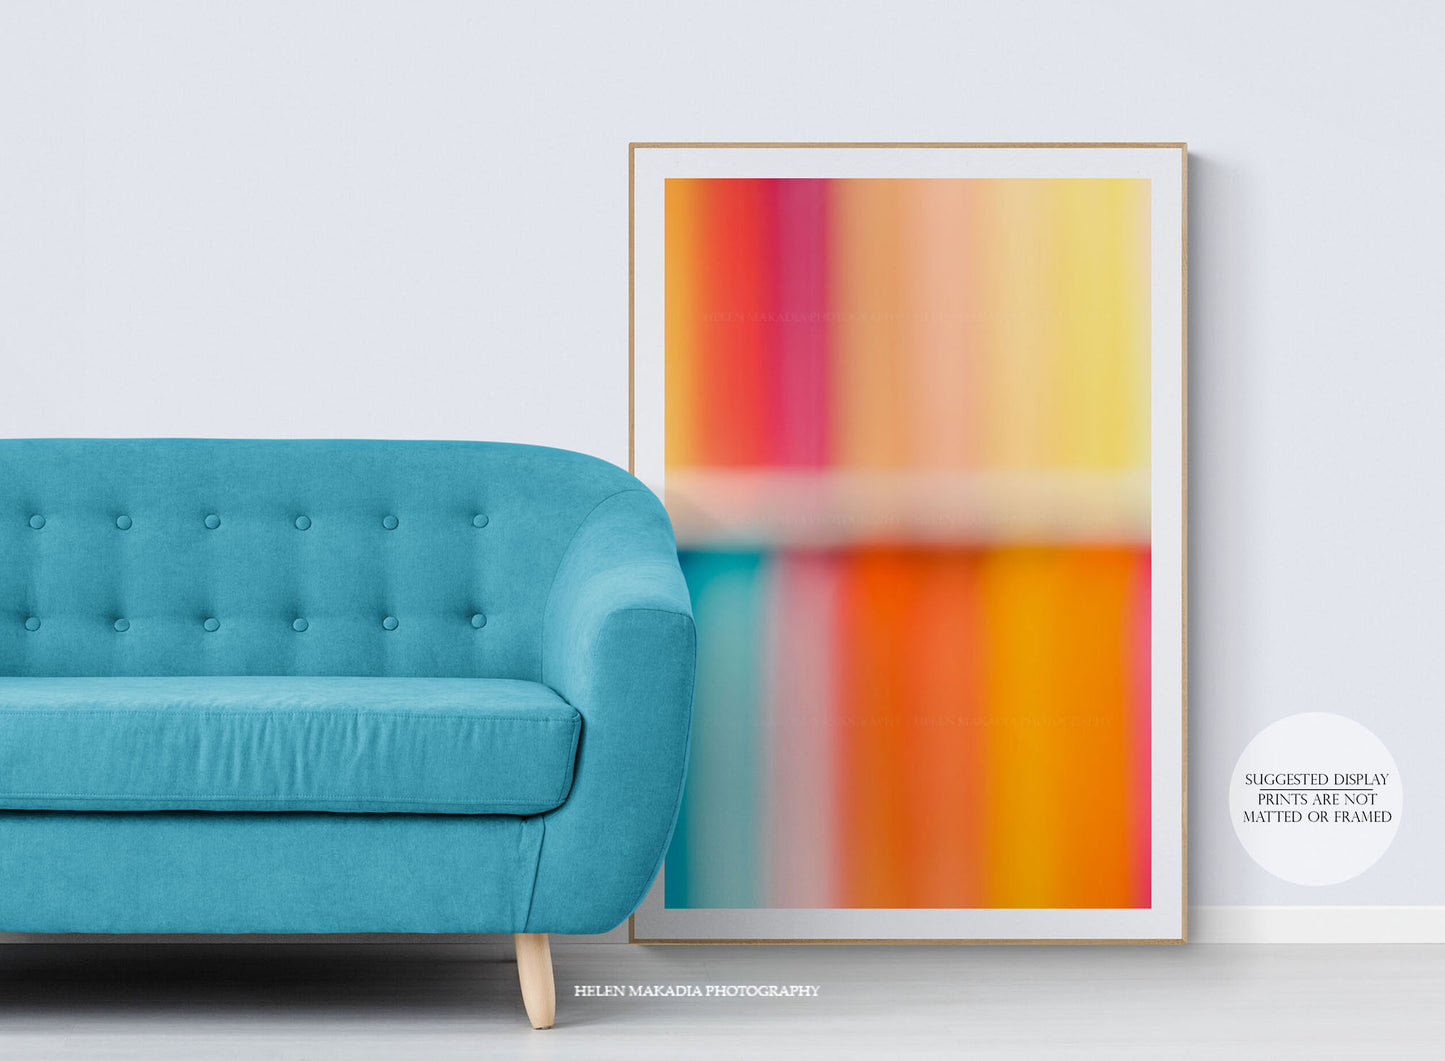 Palette of Bright Summer Colors Photograph Print Framed in a Living Room 